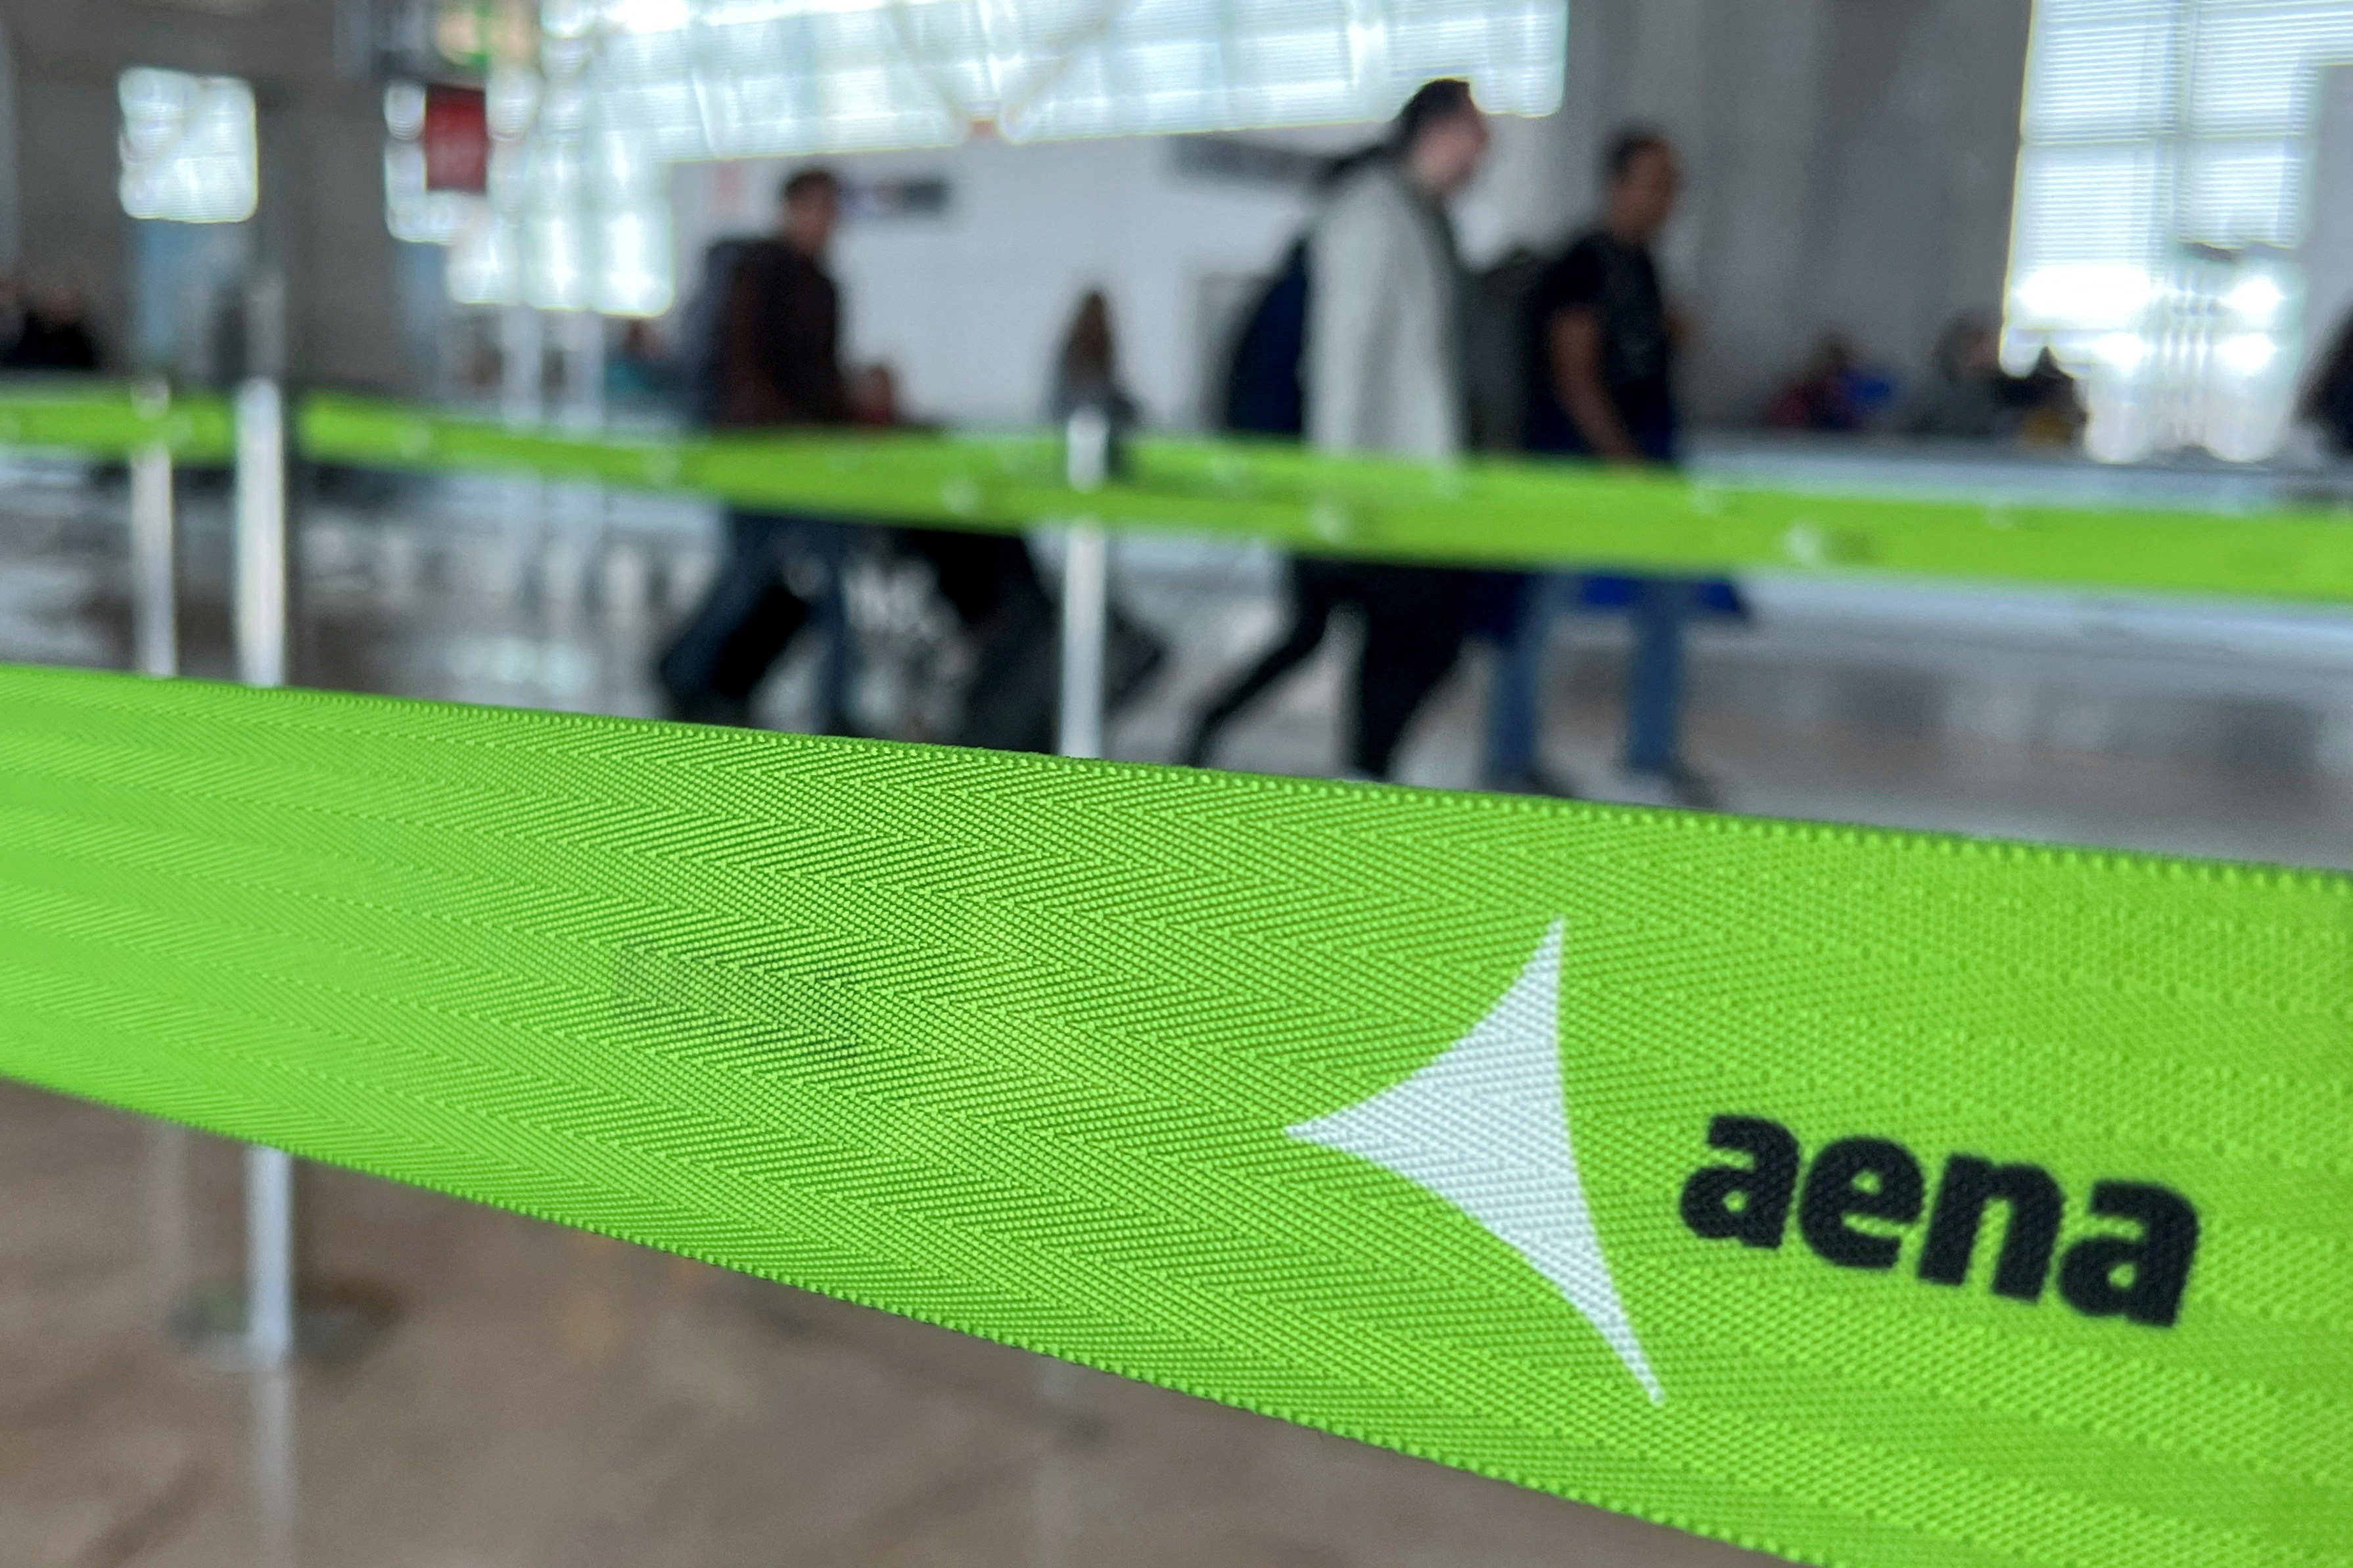 The logo of Spanish airports operator Aena is seen at the Adolfo Suarez Barajas airport in Madrid